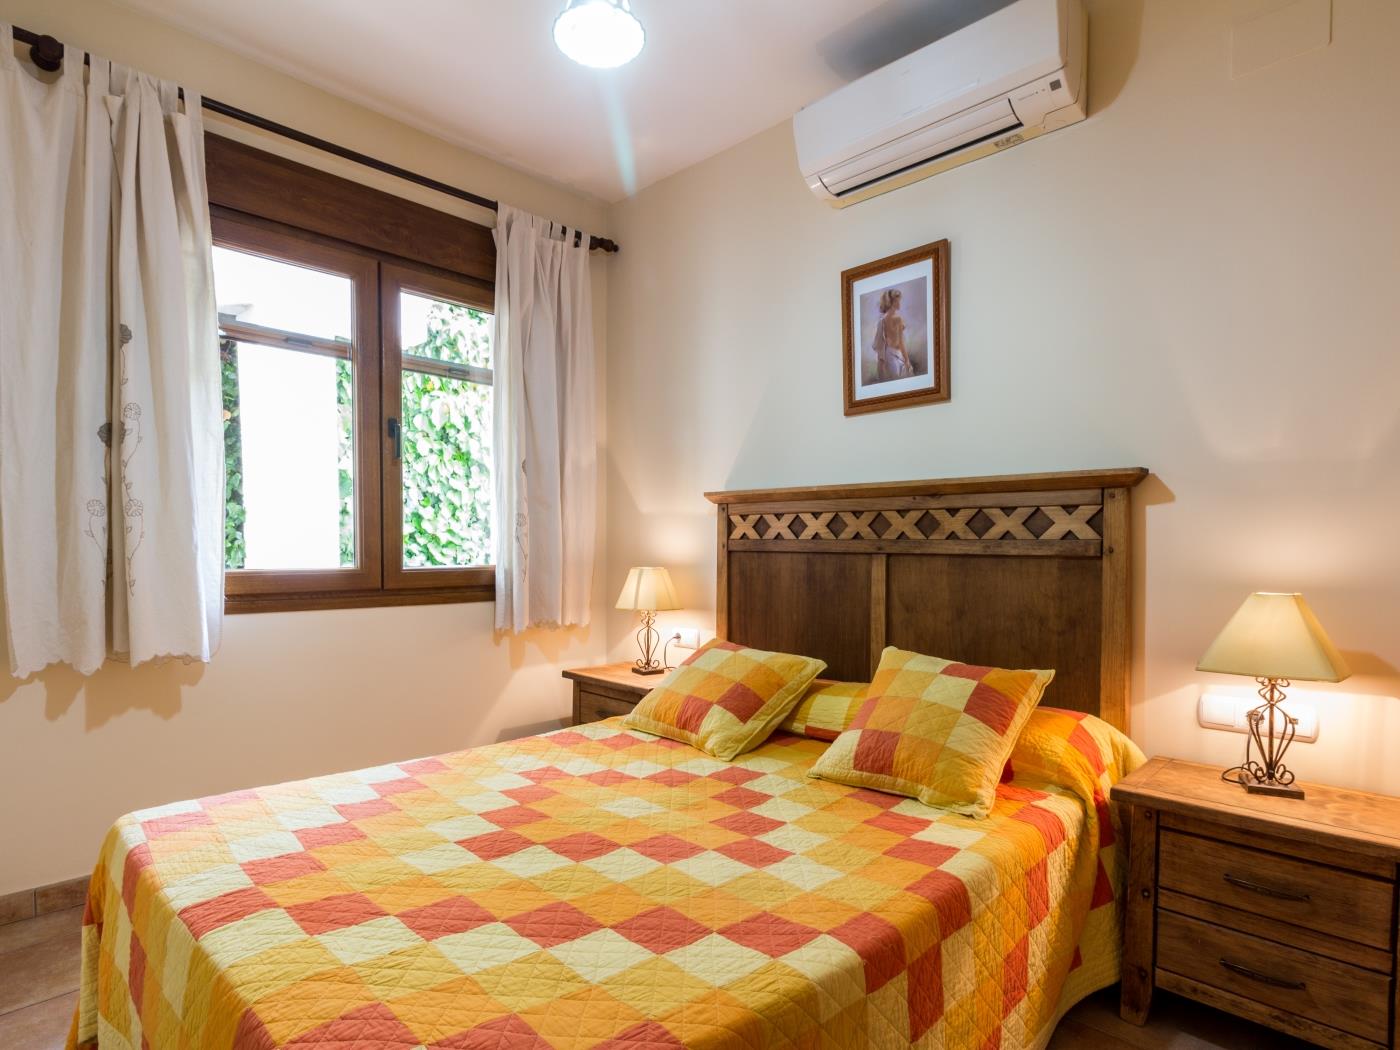 Accommodation with pool and paddle tennis court in Padul